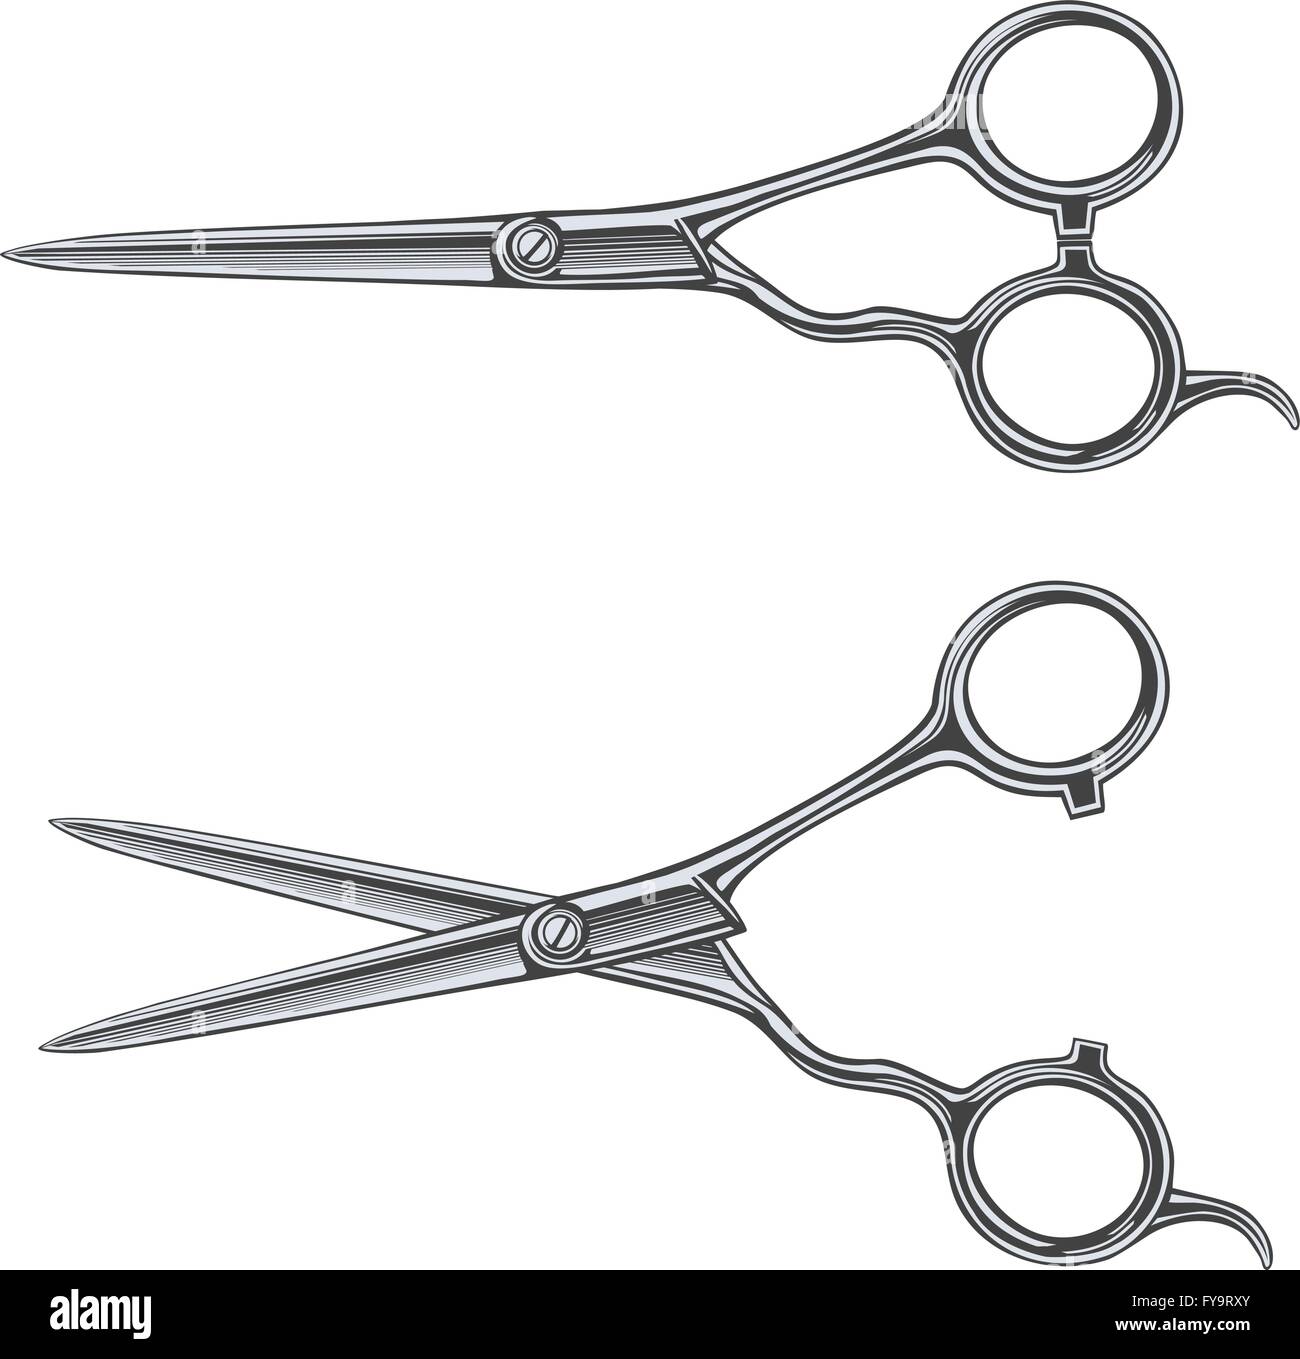 Vector illustration of Scissors in vintage engraving style on transparent background Stock Vector